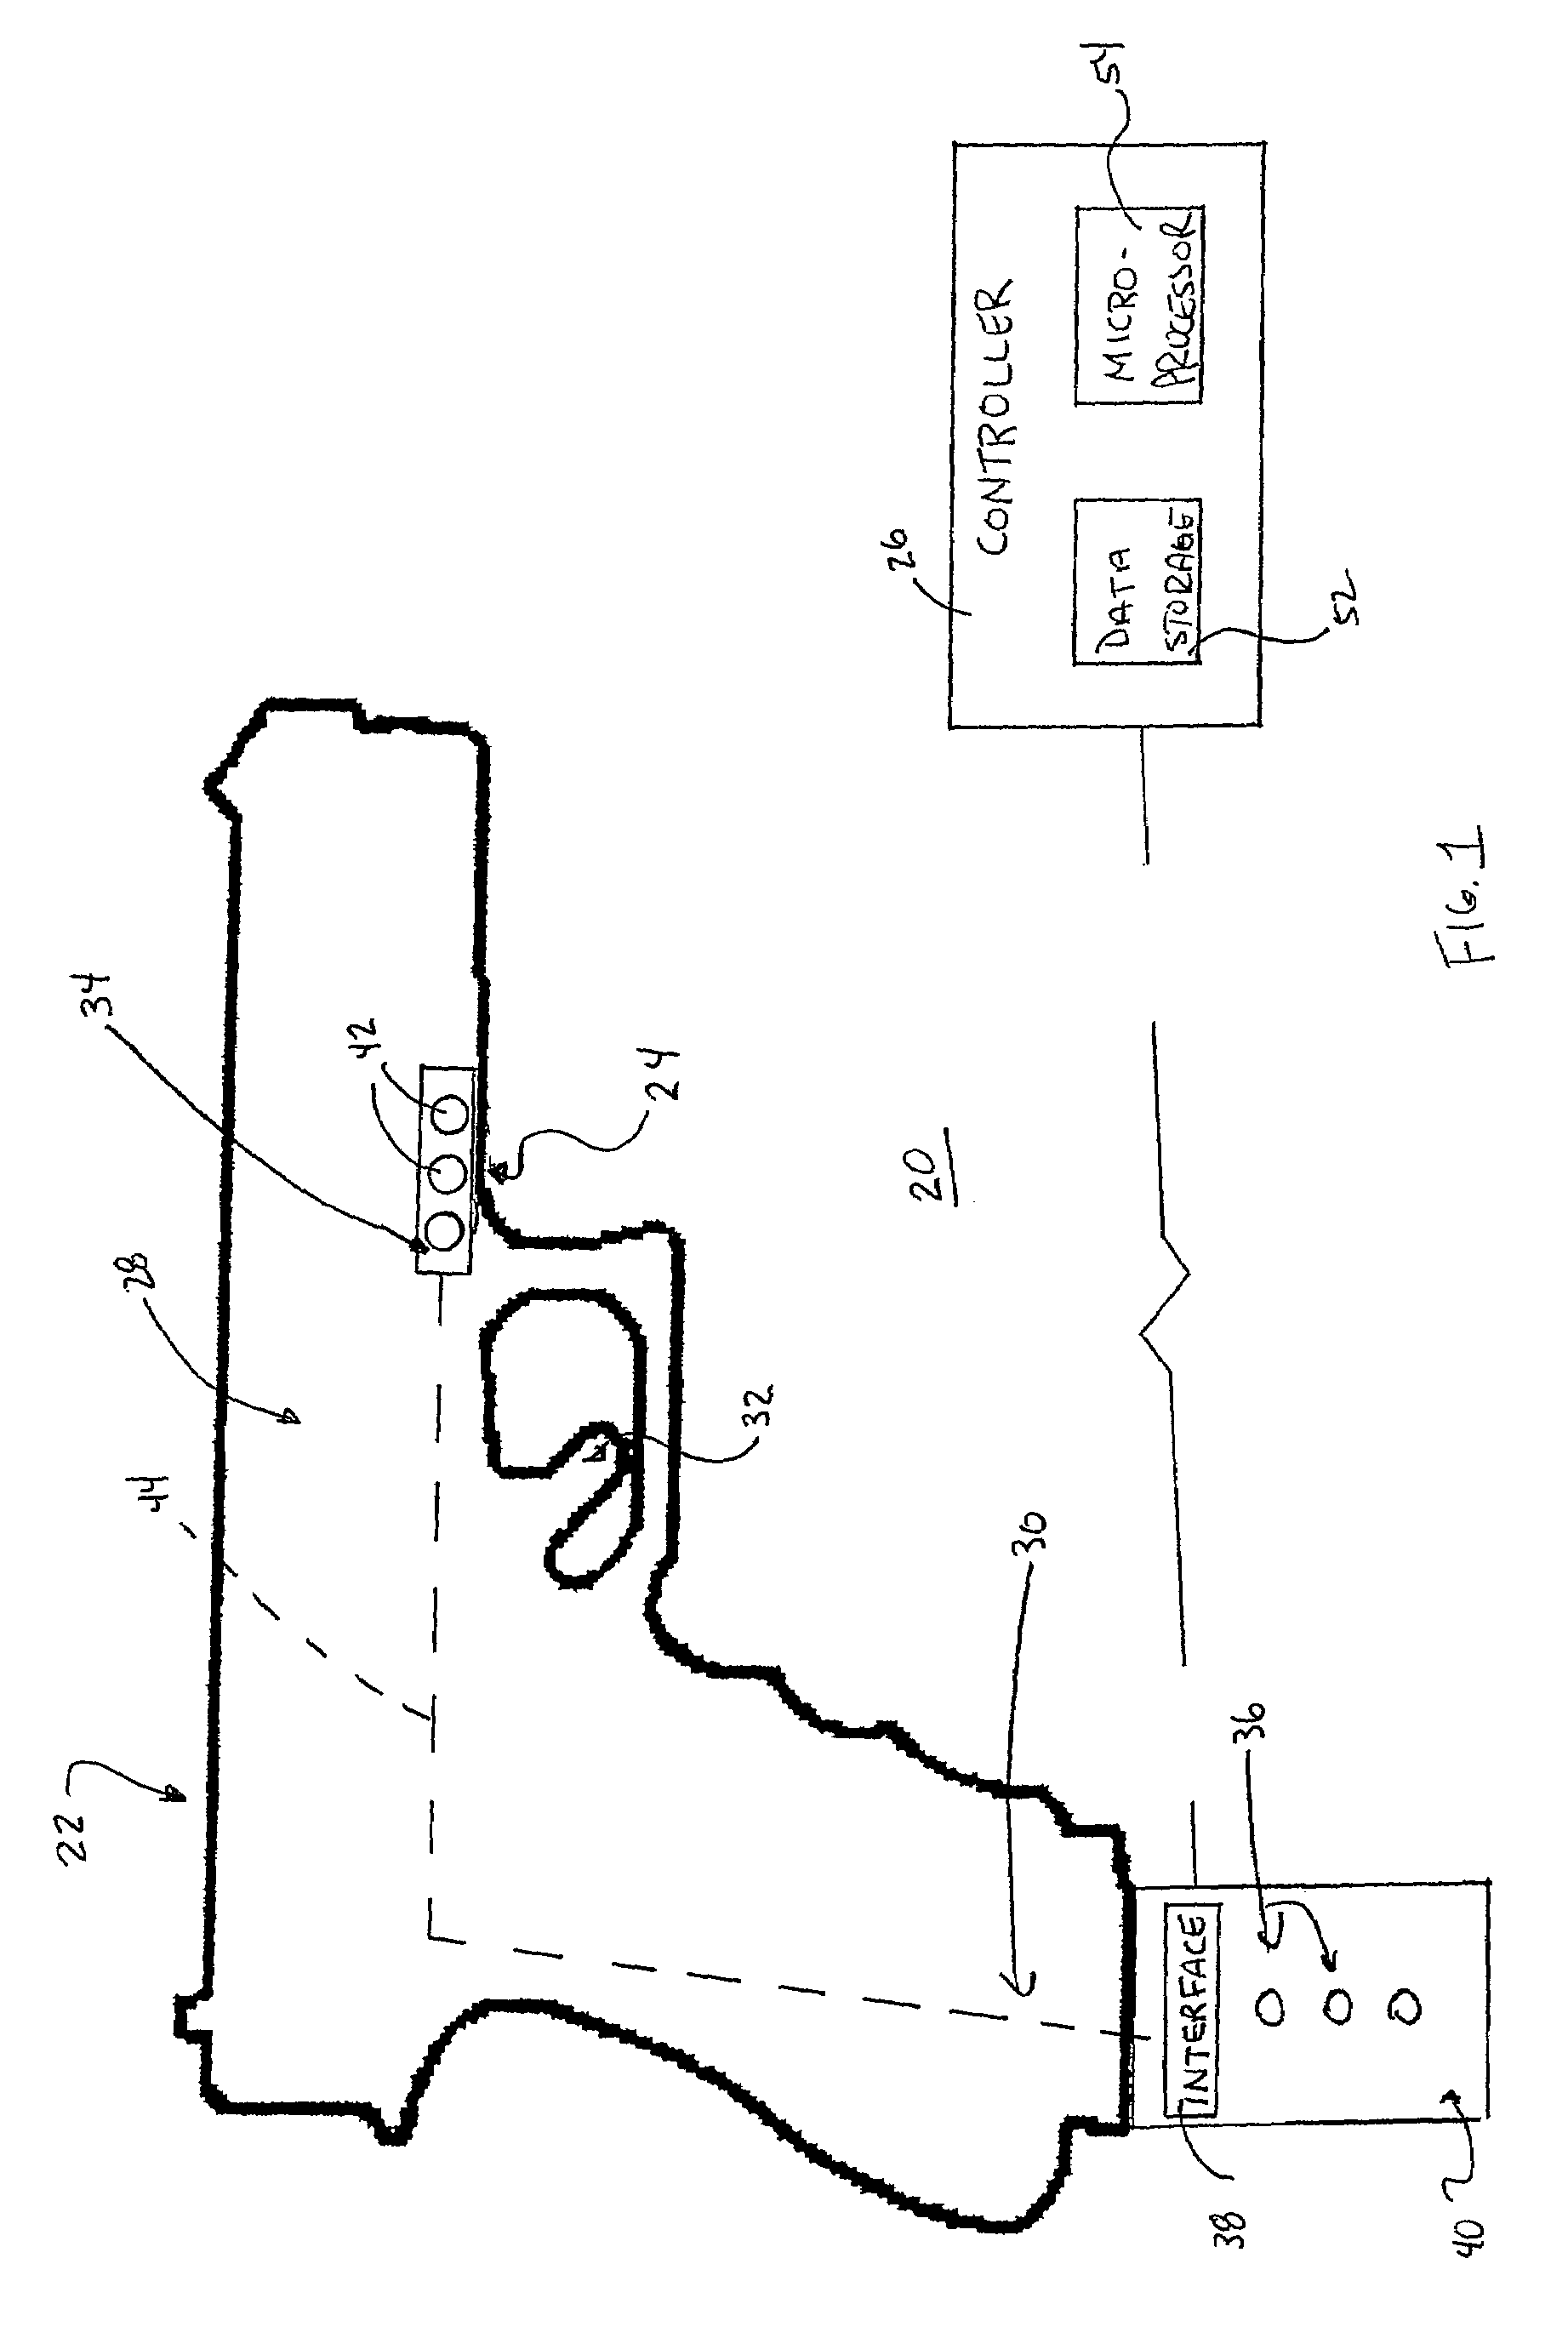 System and method for monitoring handling of a firearm or other trigger-based device